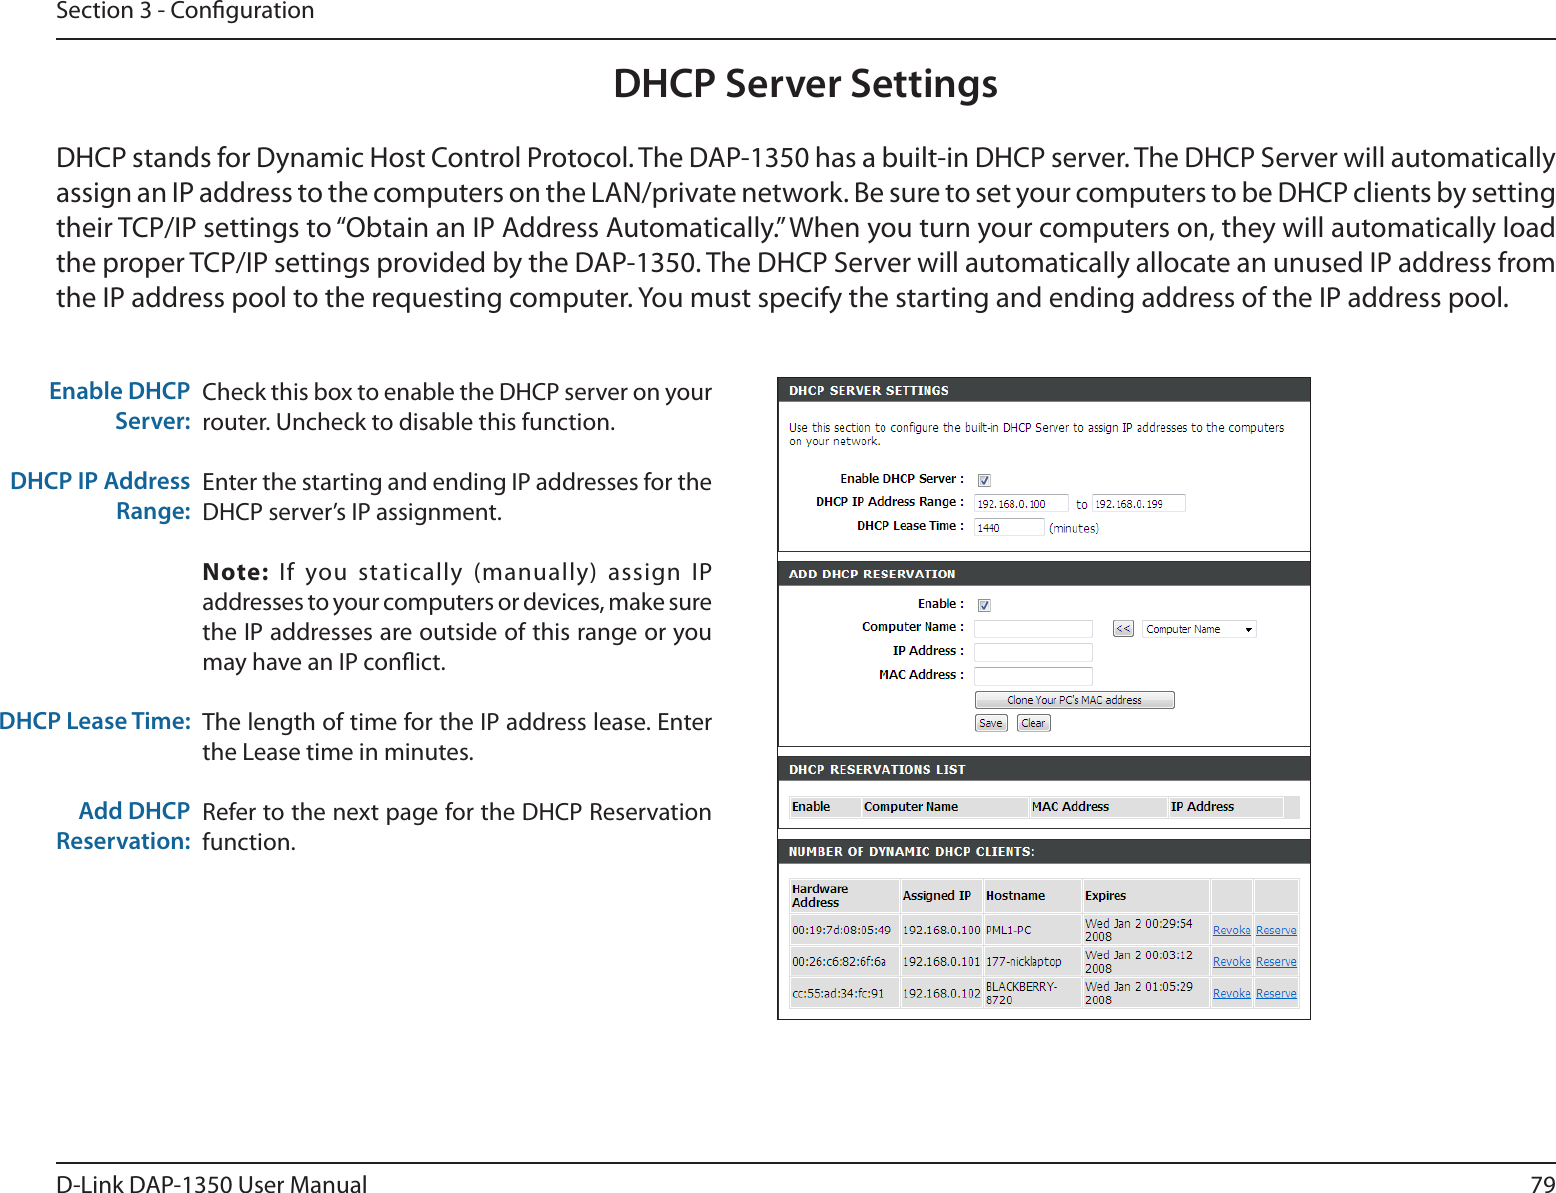 79D-Link DAP-1350 User ManualSection 3 - CongurationCheck this box to enable the DHCP server on your router. Uncheck to disable this function.Enter the starting and ending IP addresses for the DHCP server’s IP assignment.Note:  If you  statically  (manually) assign IP addresses to your computers or devices, make sure the IP addresses are outside of this range or you may have an IP conict. The length of time for the IP address lease. Enter the Lease time in minutes.Refer to the next page for the DHCP Reservation function.Enable DHCP Server:DHCP IP Address Range:DHCP Lease Time:Add DHCP Reservation:DHCP Server SettingsDHCP stands for Dynamic Host Control Protocol. The DAP-1350 has a built-in DHCP server. The DHCP Server will automatically assign an IP address to the computers on the LAN/private network. Be sure to set your computers to be DHCP clients by setting their TCP/IP settings to “Obtain an IP Address Automatically.” When you turn your computers on, they will automatically load the proper TCP/IP settings provided by the DAP-1350. The DHCP Server will automatically allocate an unused IP address from the IP address pool to the requesting computer. You must specify the starting and ending address of the IP address pool.